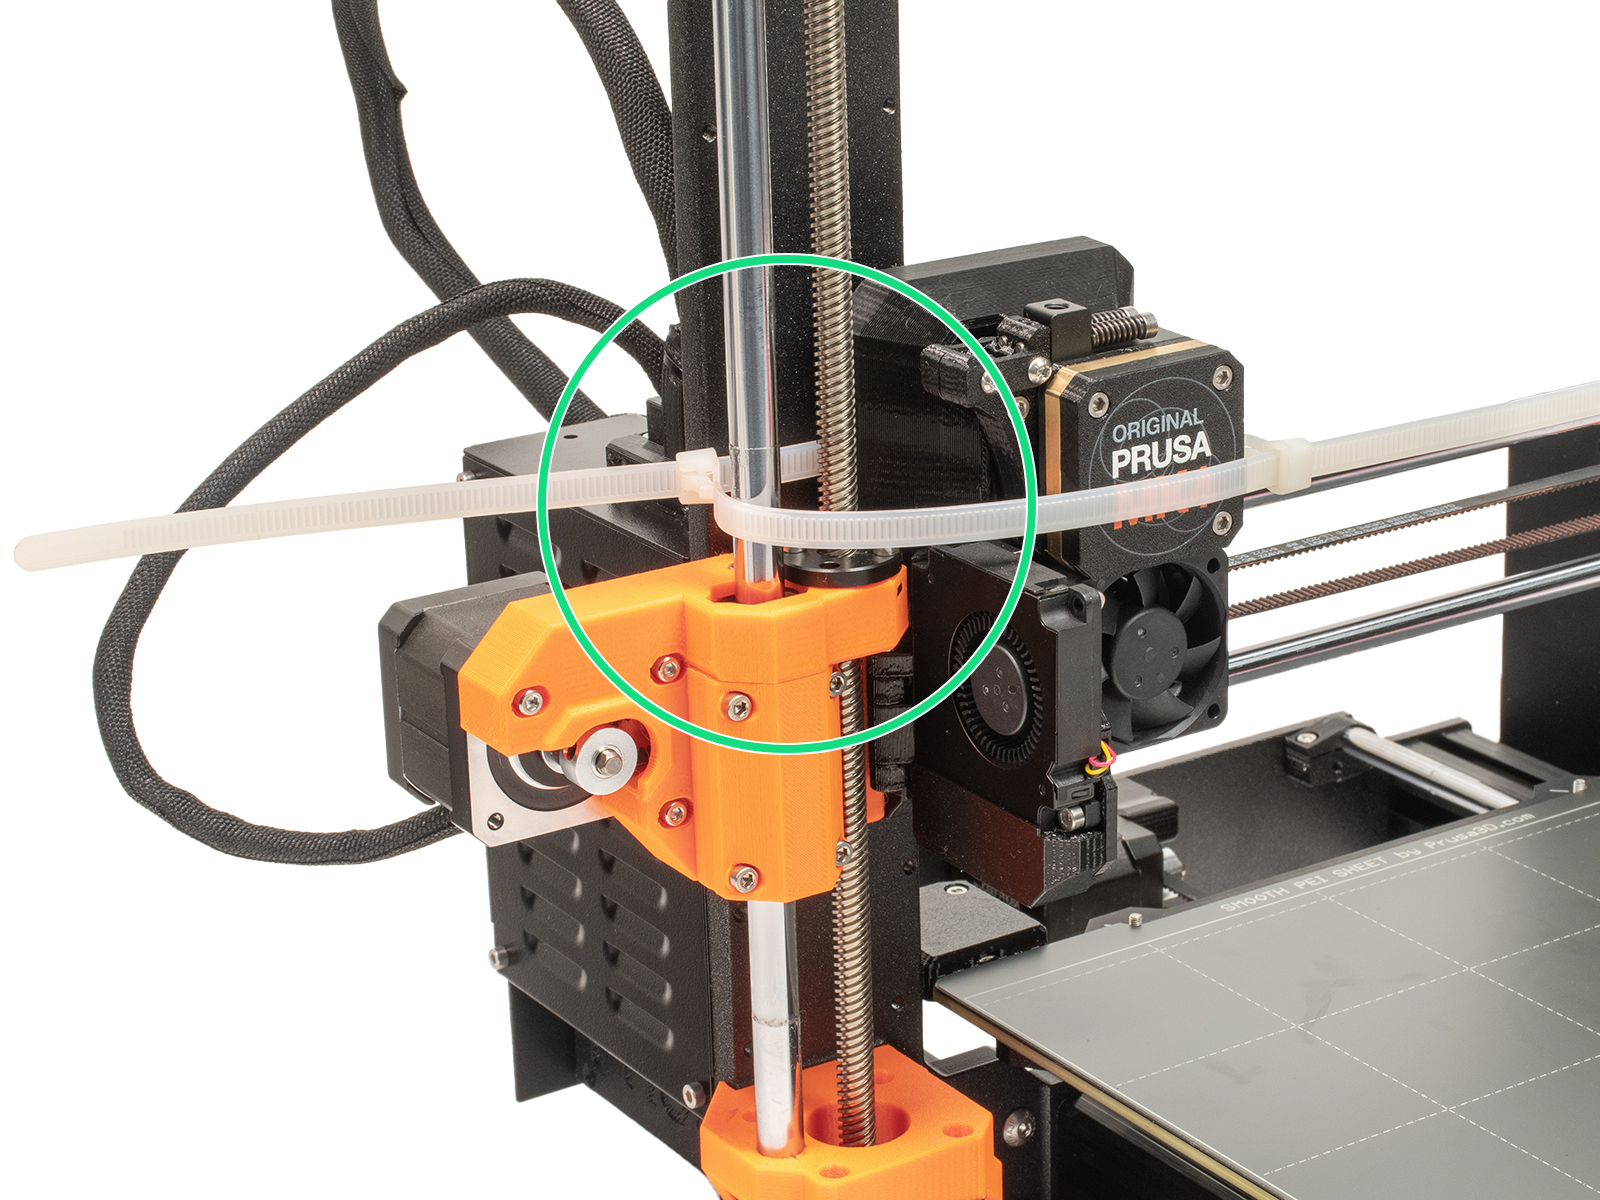 Securing the extruder with zip-ties (Part 1)